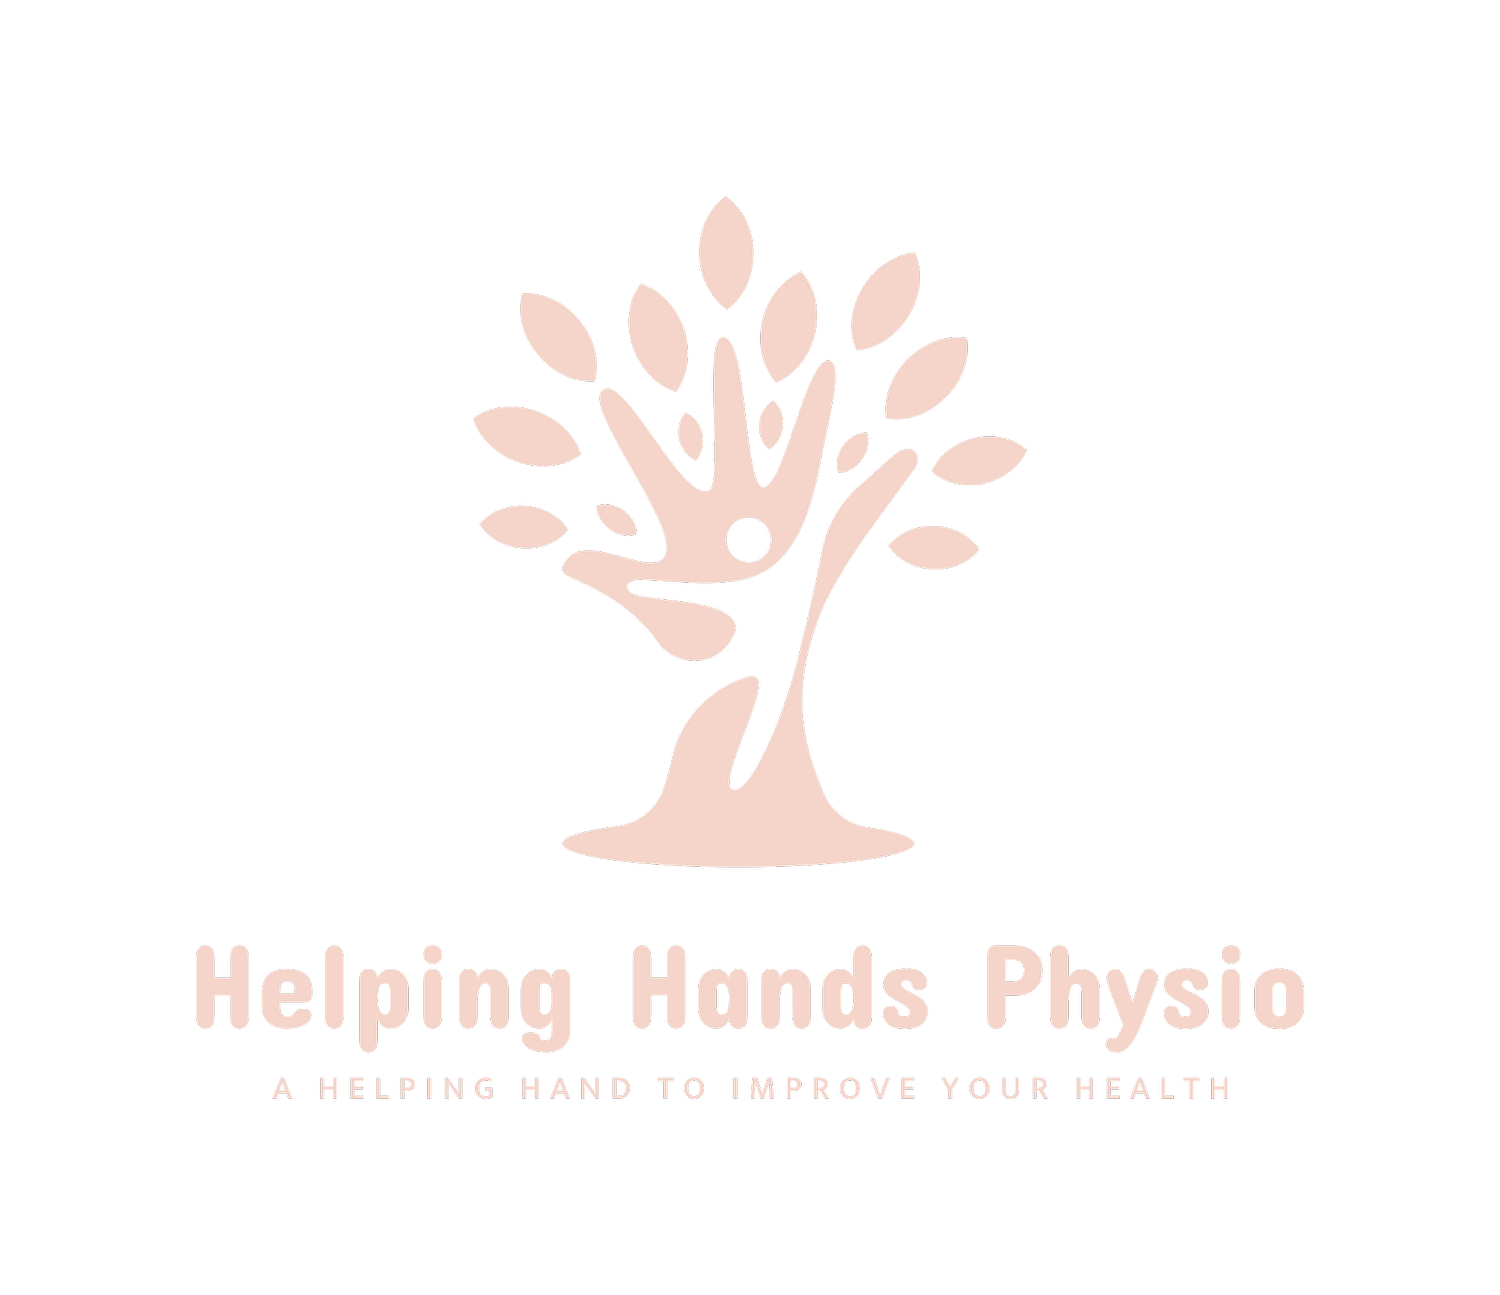 Helping hands physio